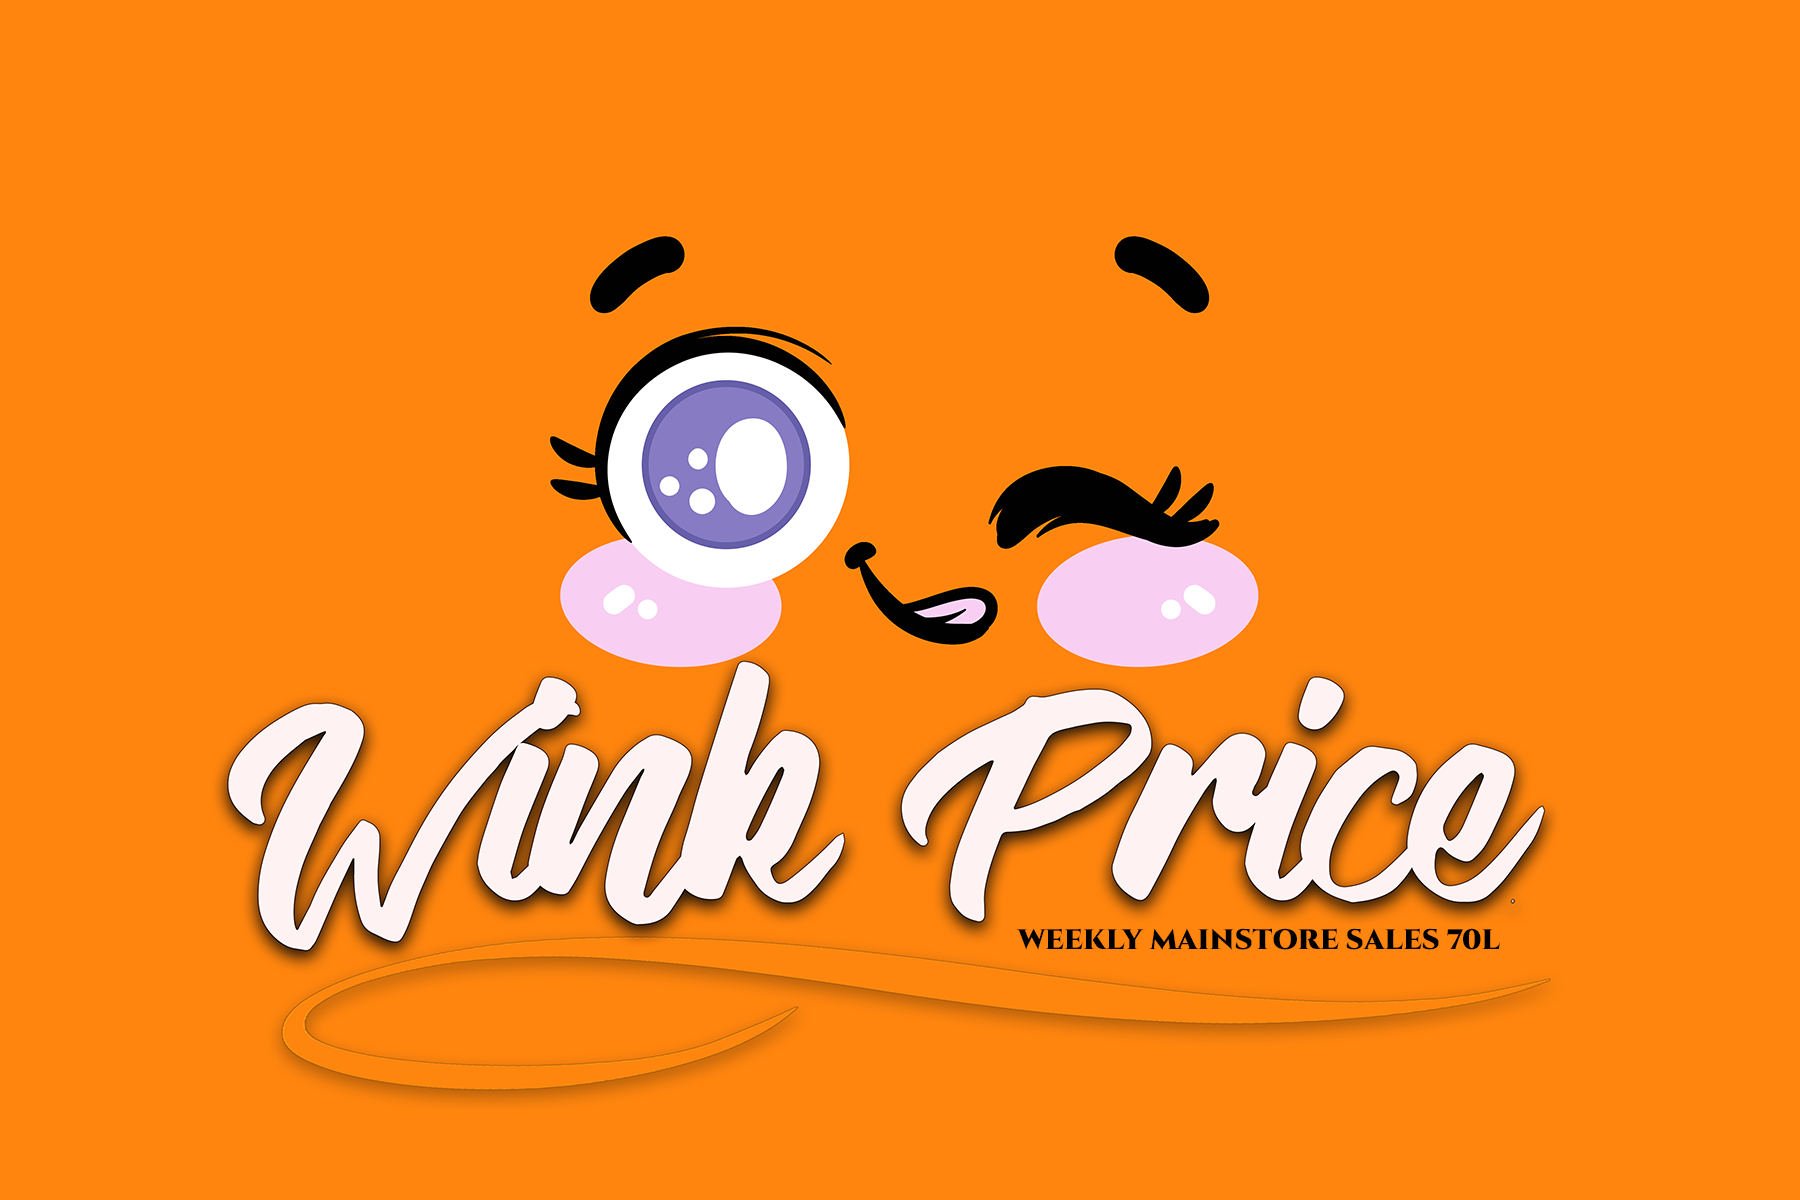 WINK PRICE WEDNESDAY IS HERE